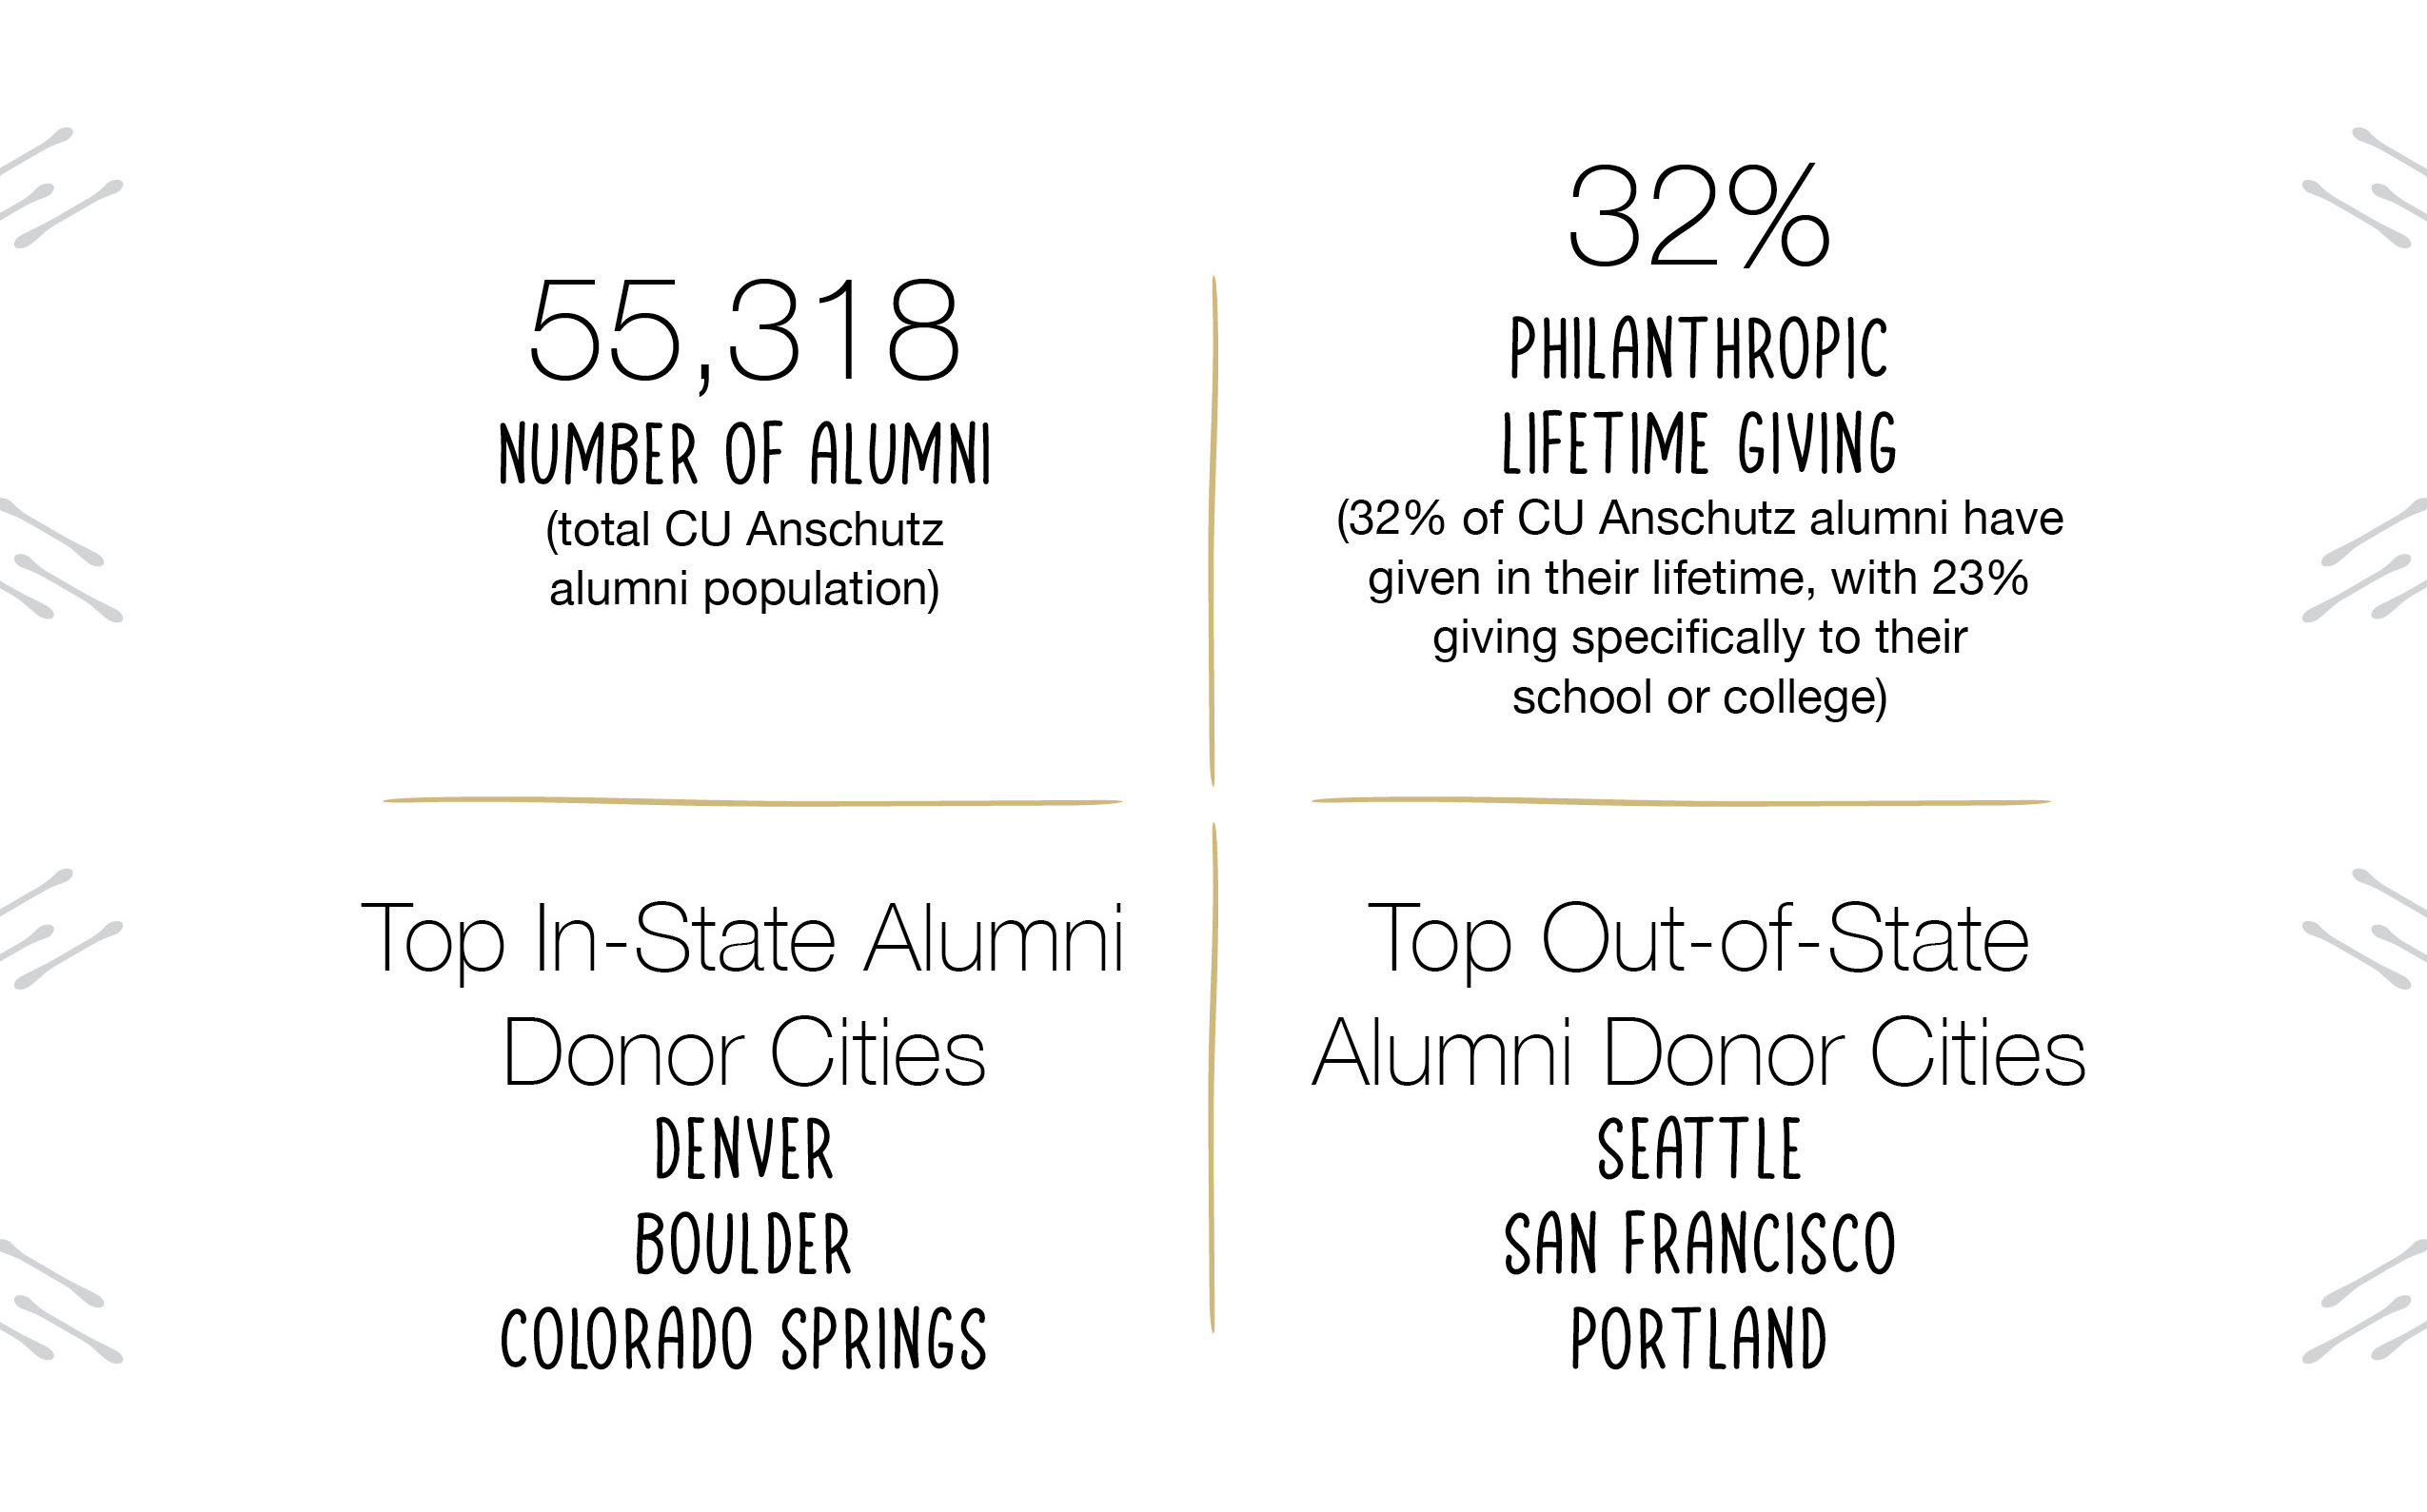 Alumni Stats: 55,318 CU Anschutz alumni; 32% have given in their lifetimes, with 23% to their college; top markets Denver, Boulder and Colorado Springs; Seattle, San Francisco and Portland out of state